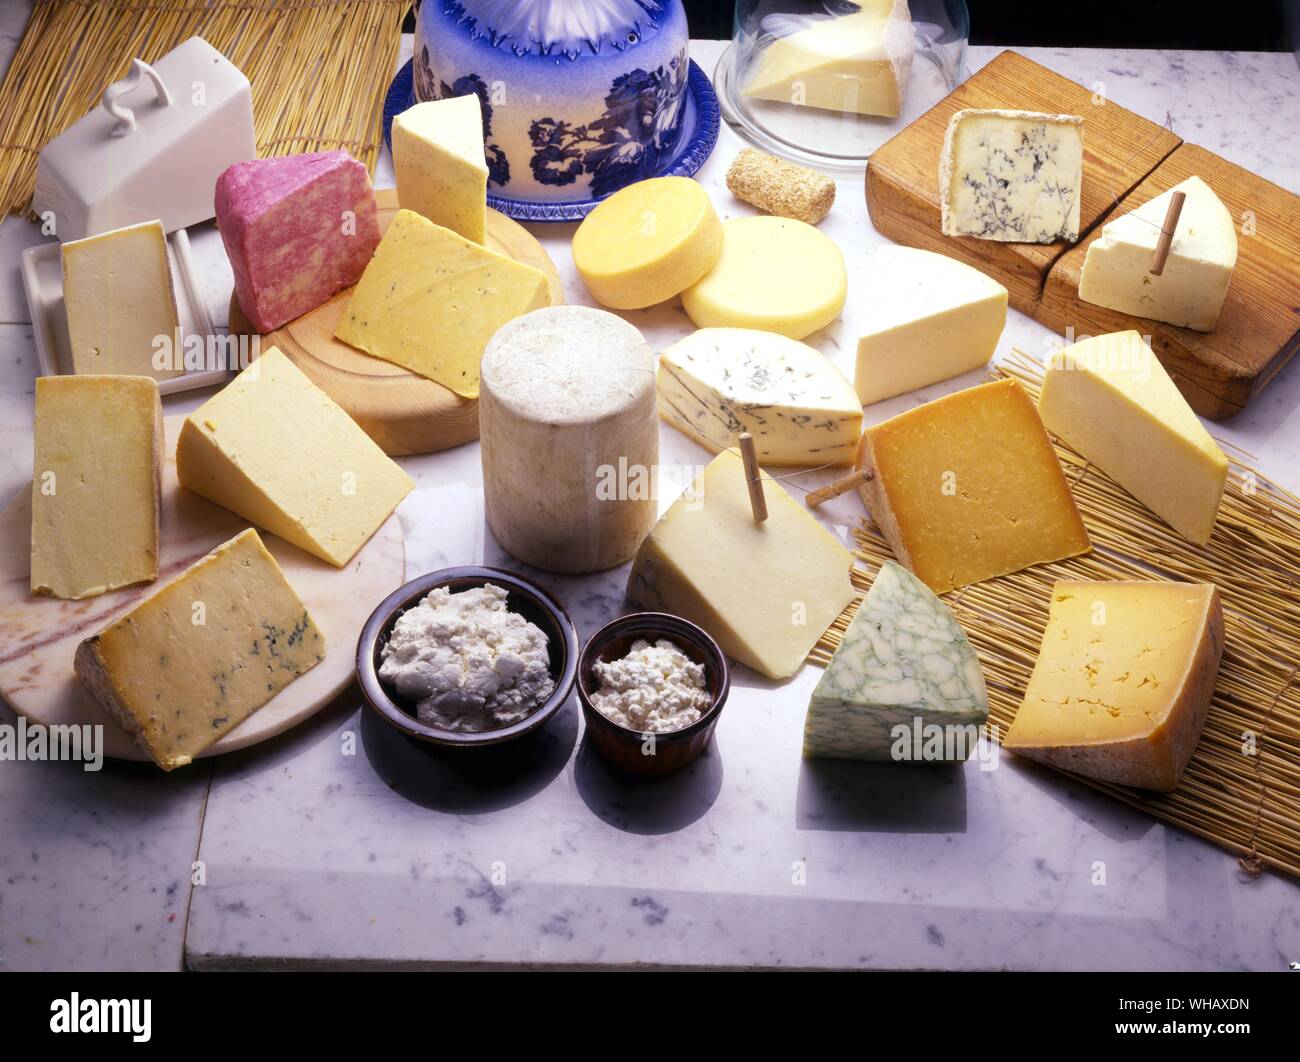 cheeses. caerphilly and cheese. red white and blue cheshire. cream and curd cheese. derby and sage derby. double gloucester. lancashire. leicester. stilton and white stilton. white and blue wensleydale. caboc. orkney and caithness. cotswold chive. ilchester. red windsor. Stock Photo